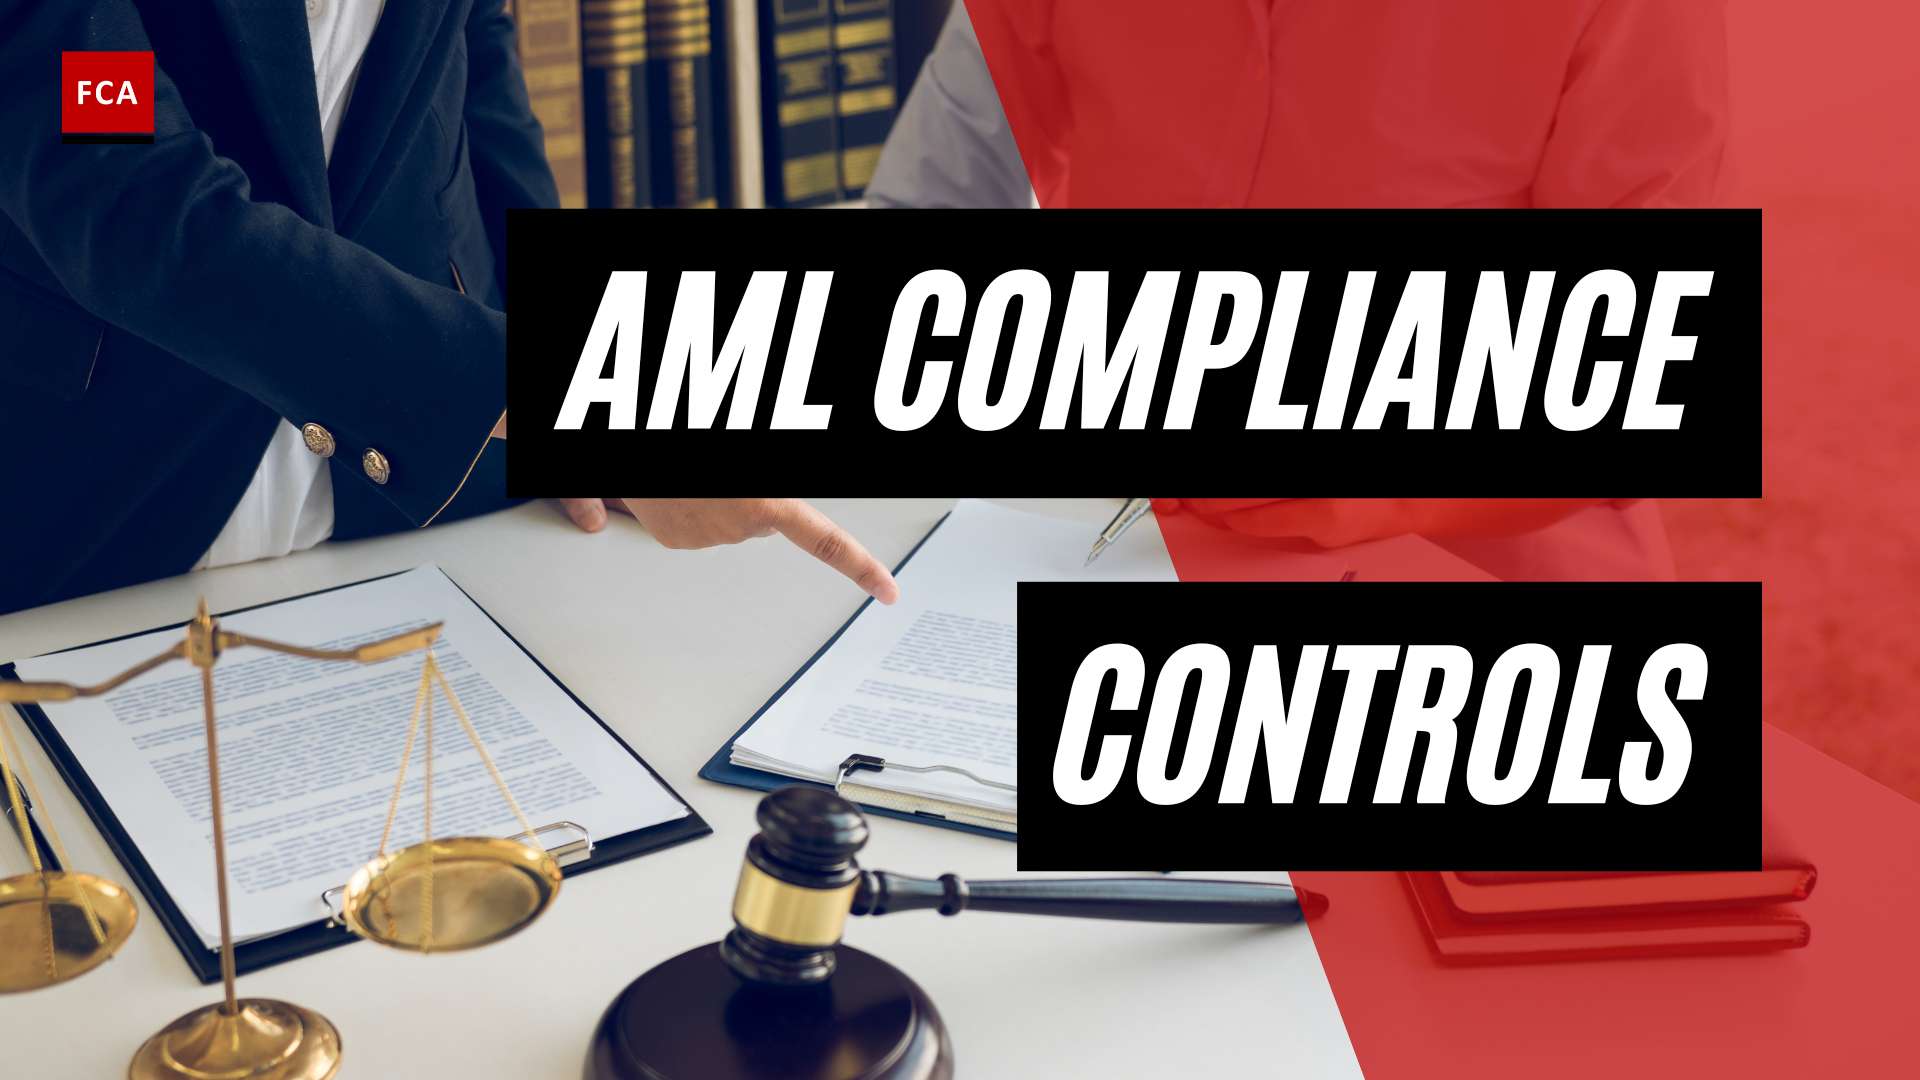 Building A Fortress: Aml Compliance Controls To Safeguard Against Money Laundering